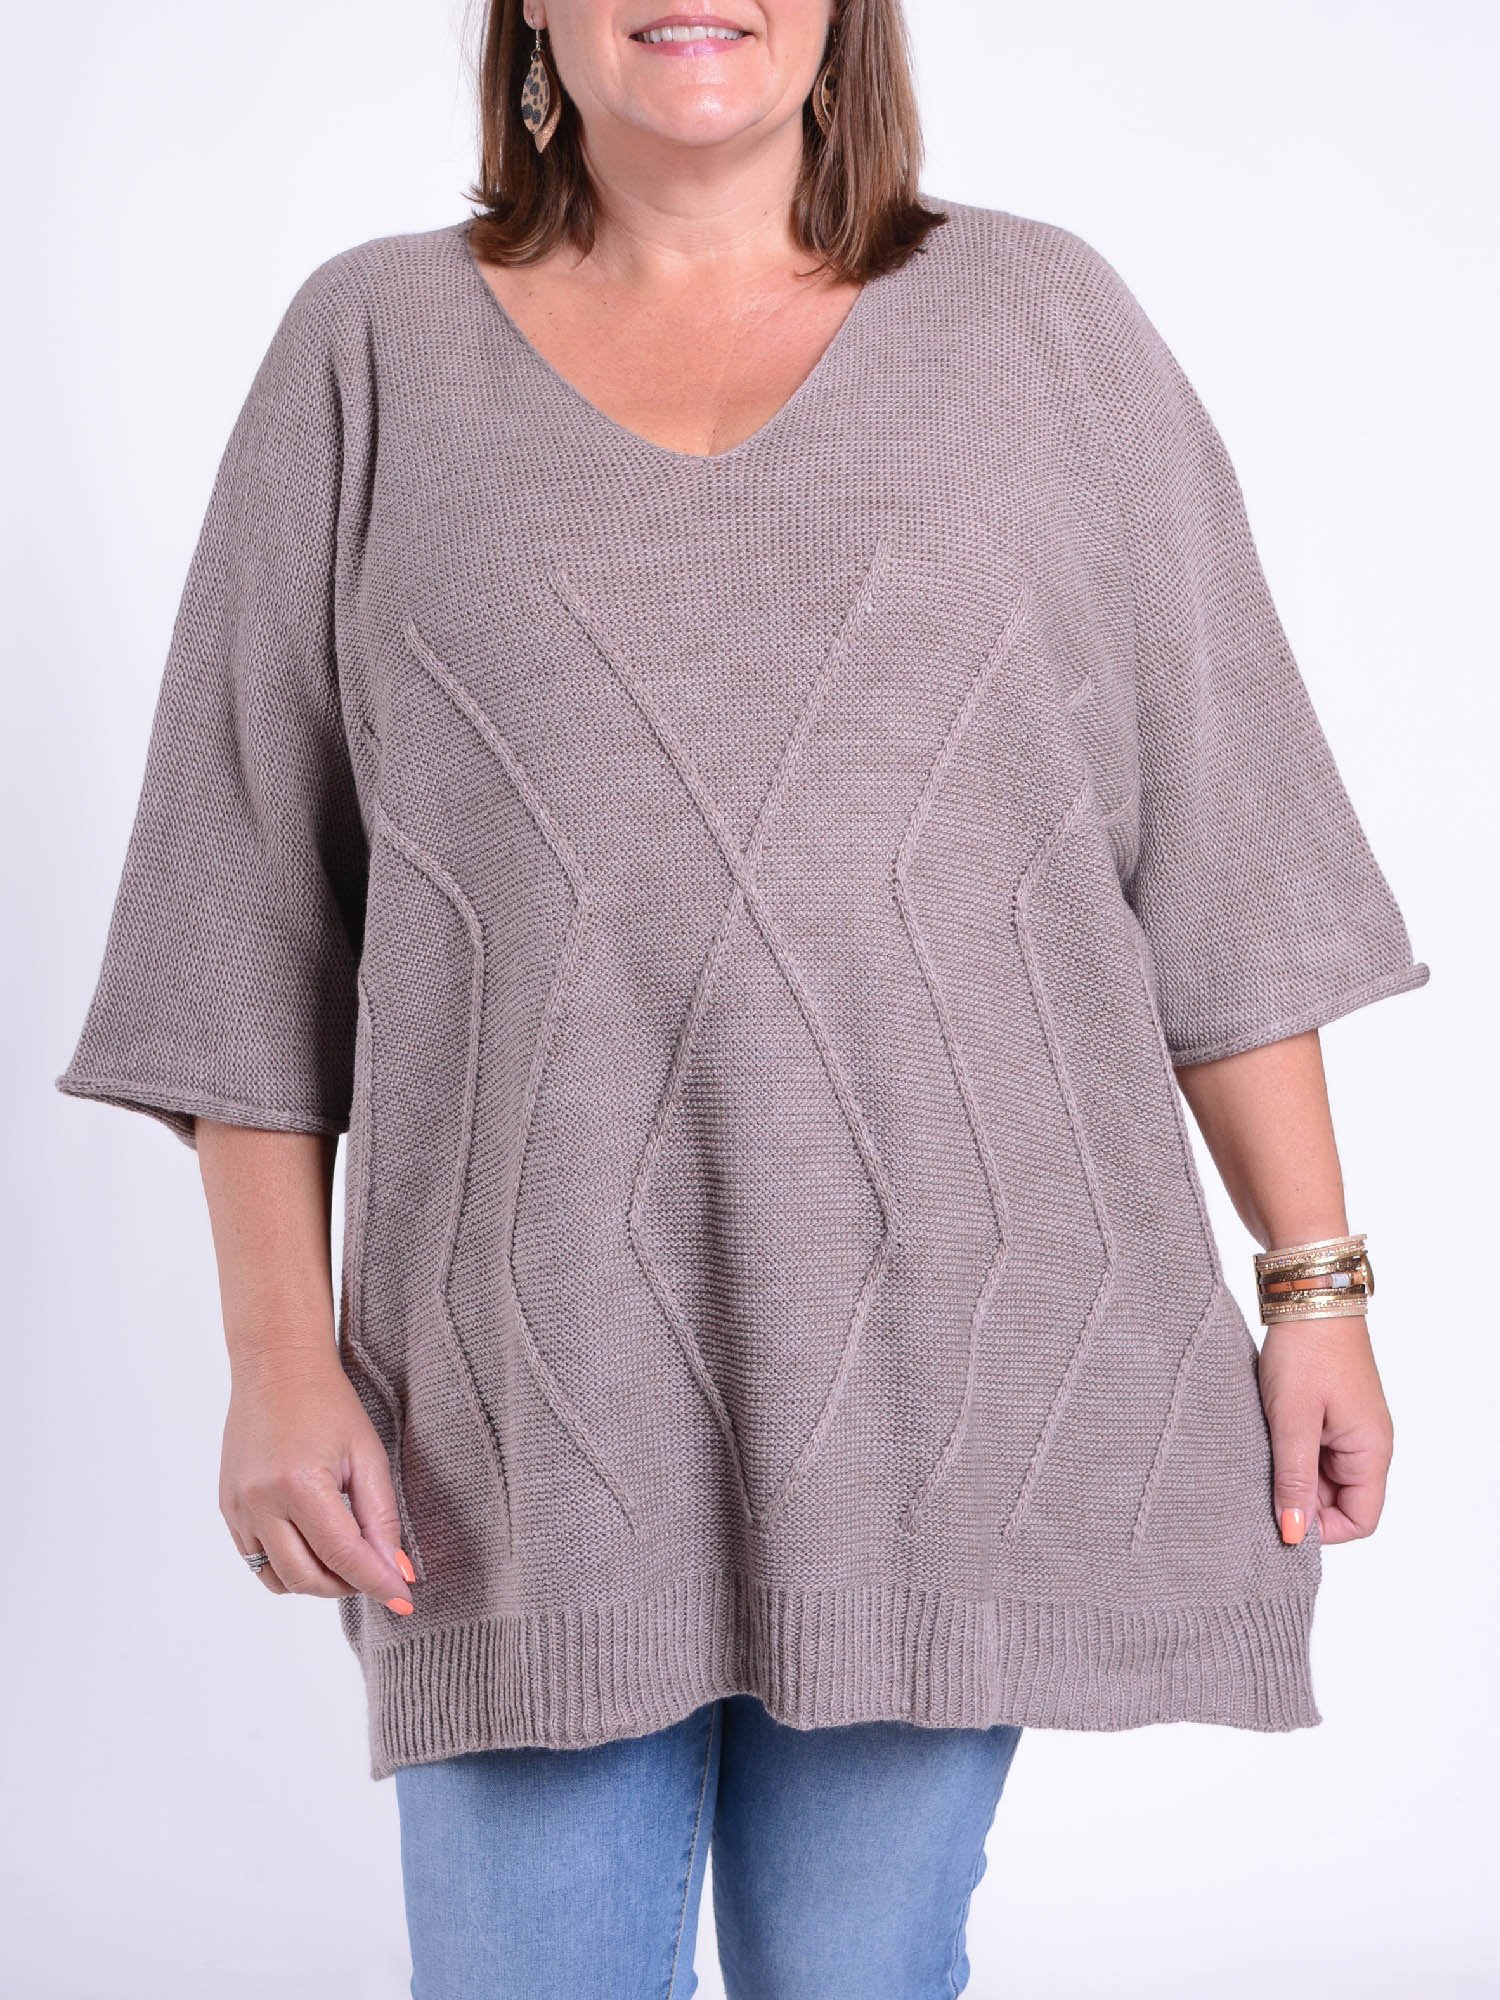 Stitched V Jumper - P34, Jumpers & Cardigans, Pure Plus Clothing, Lagenlook Clothing, Plus Size Fashion, Over 50 Fashion